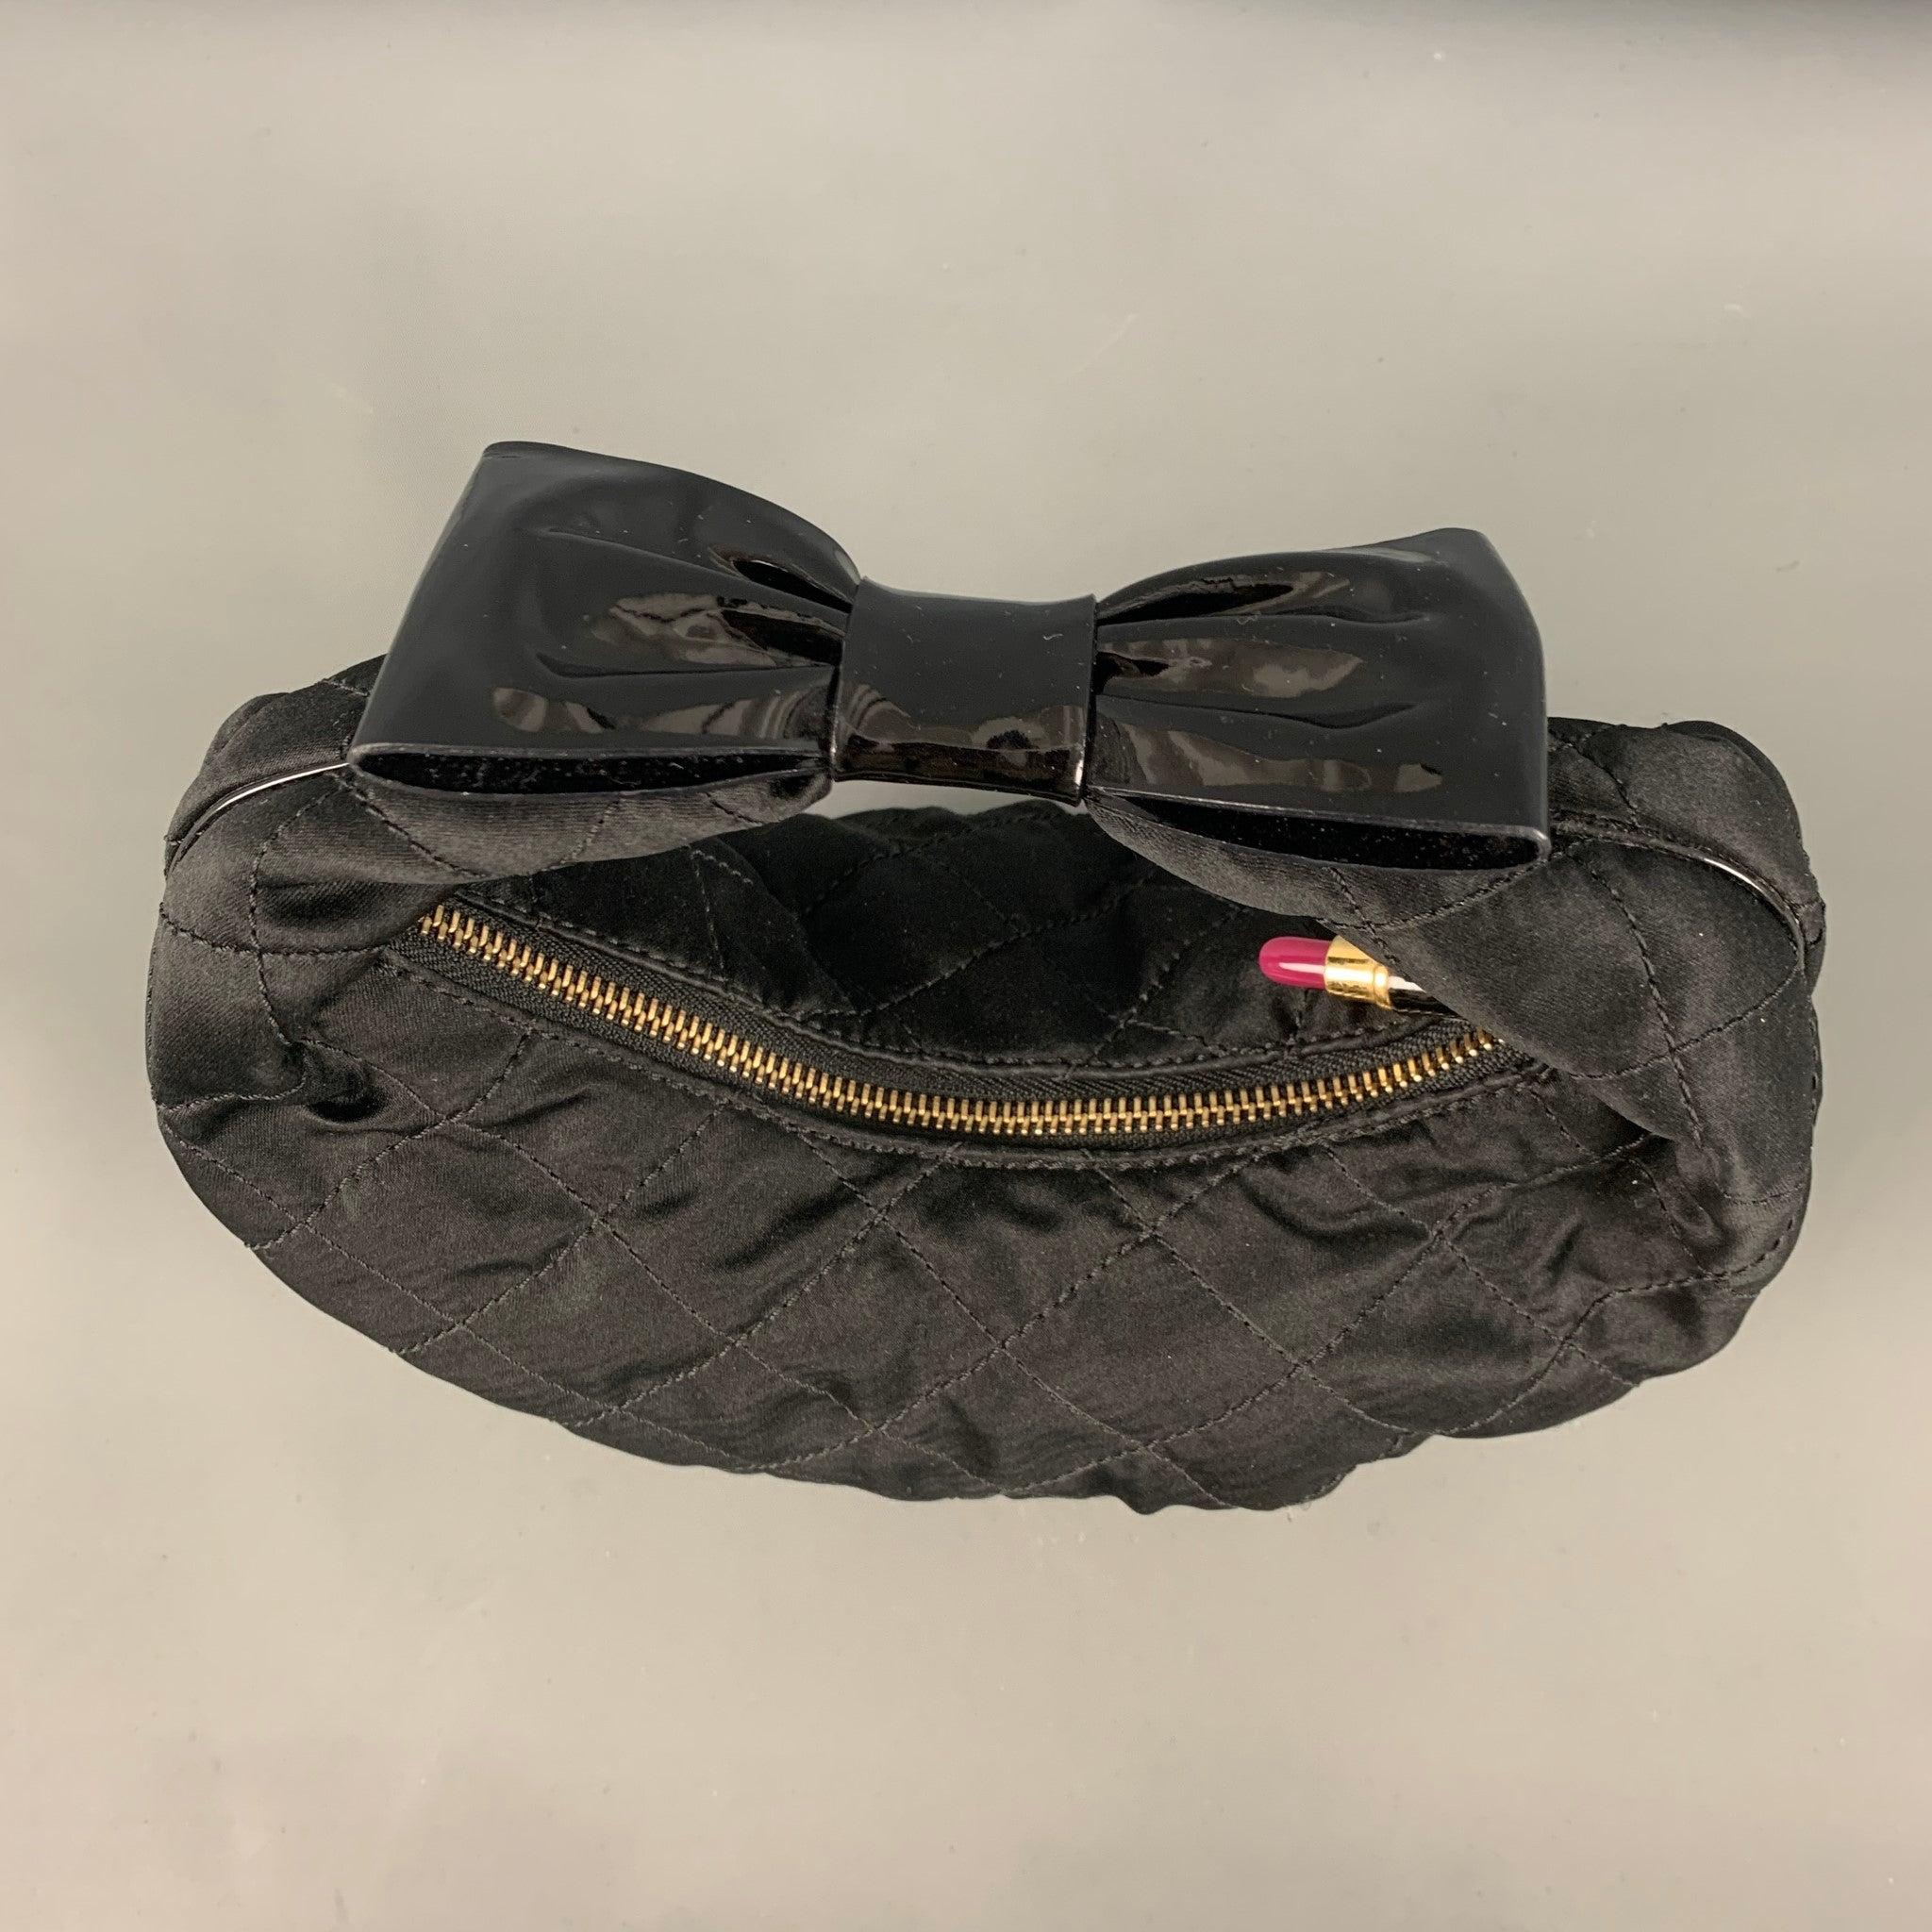 MOSCHINO Cheap and Chic bag comes in a black quilted woven material featuring a bow detail at the handle, inner pocket, and a zipper closure. Made in Italy. Very Good Pre-Owned Condition. Minor signs of wear. 

Measurements: 
  Length: 10.5 inches